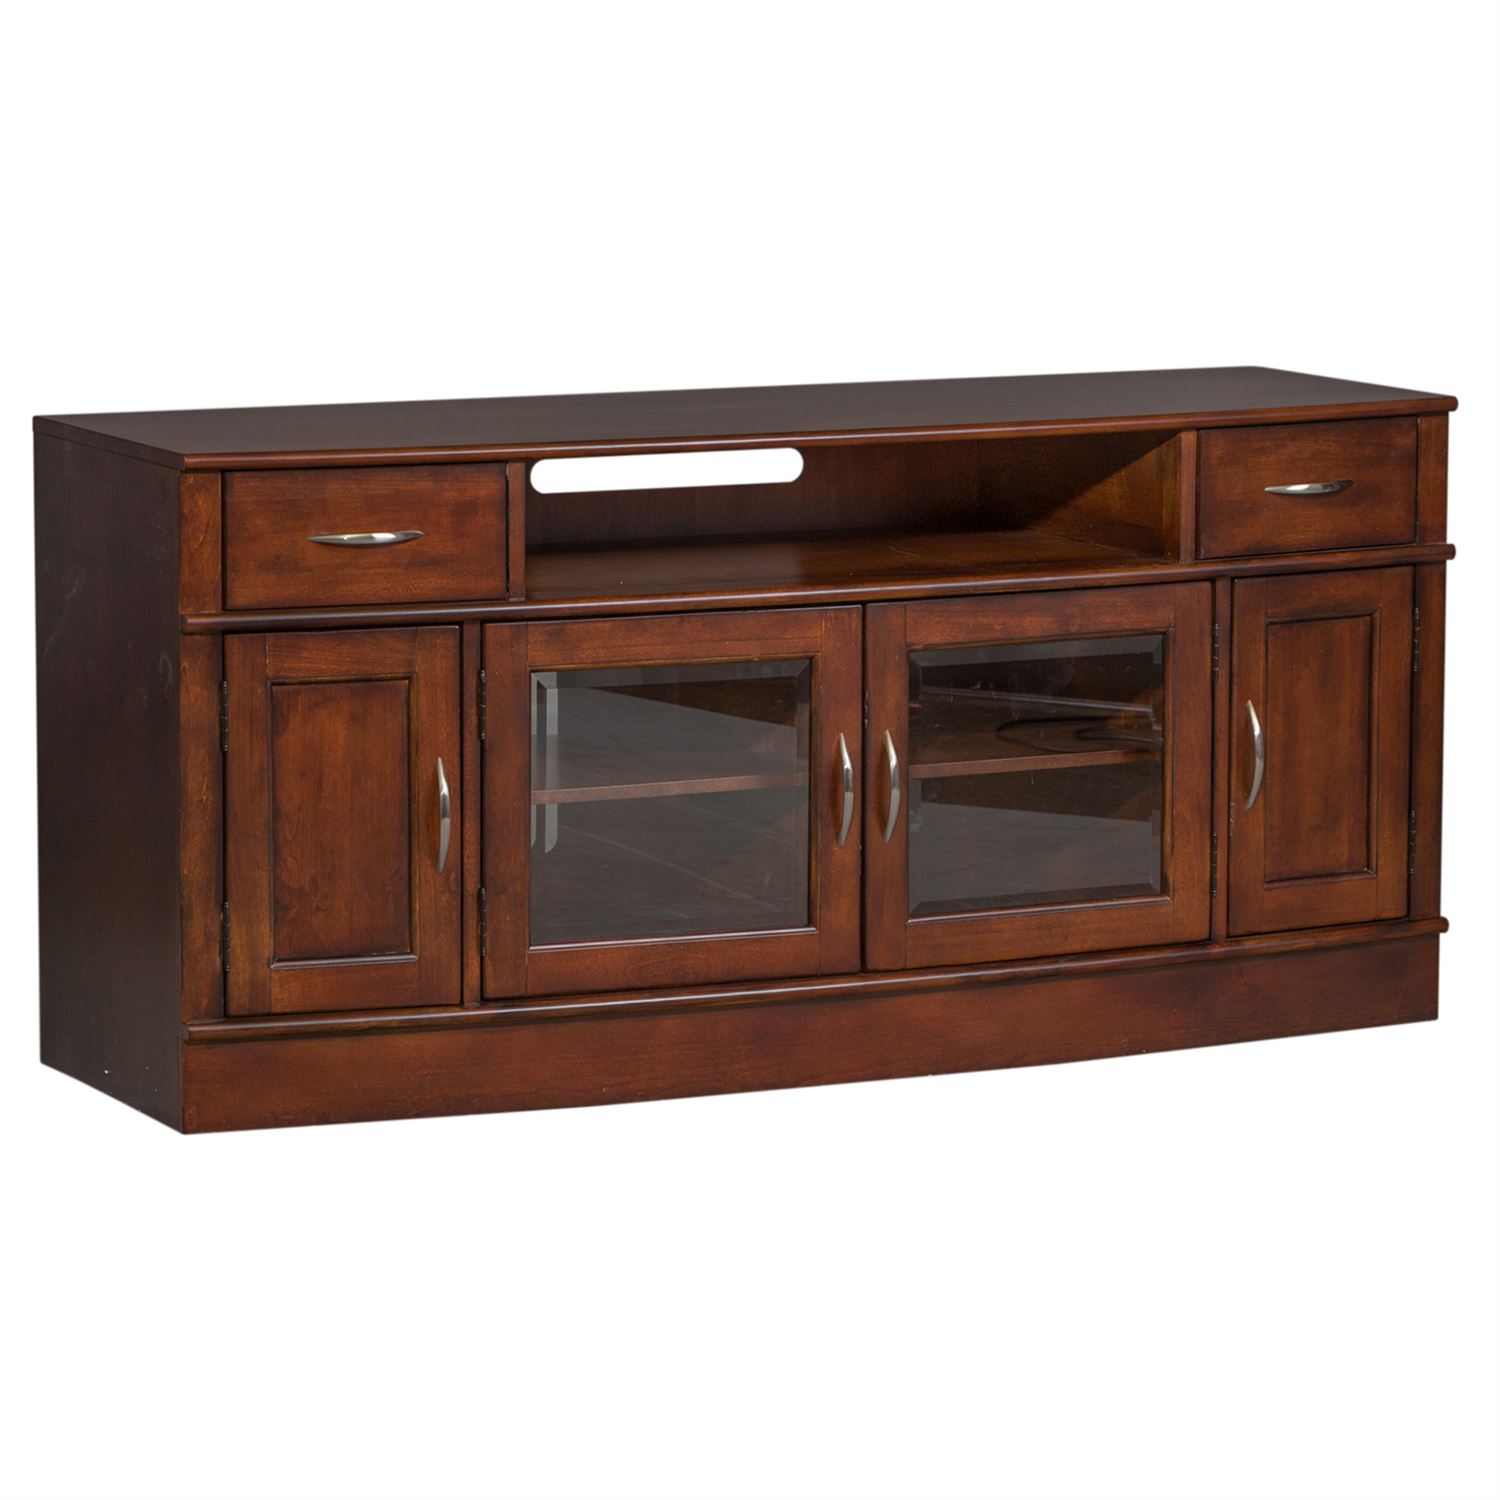 Hanover Entertainment TV Stand